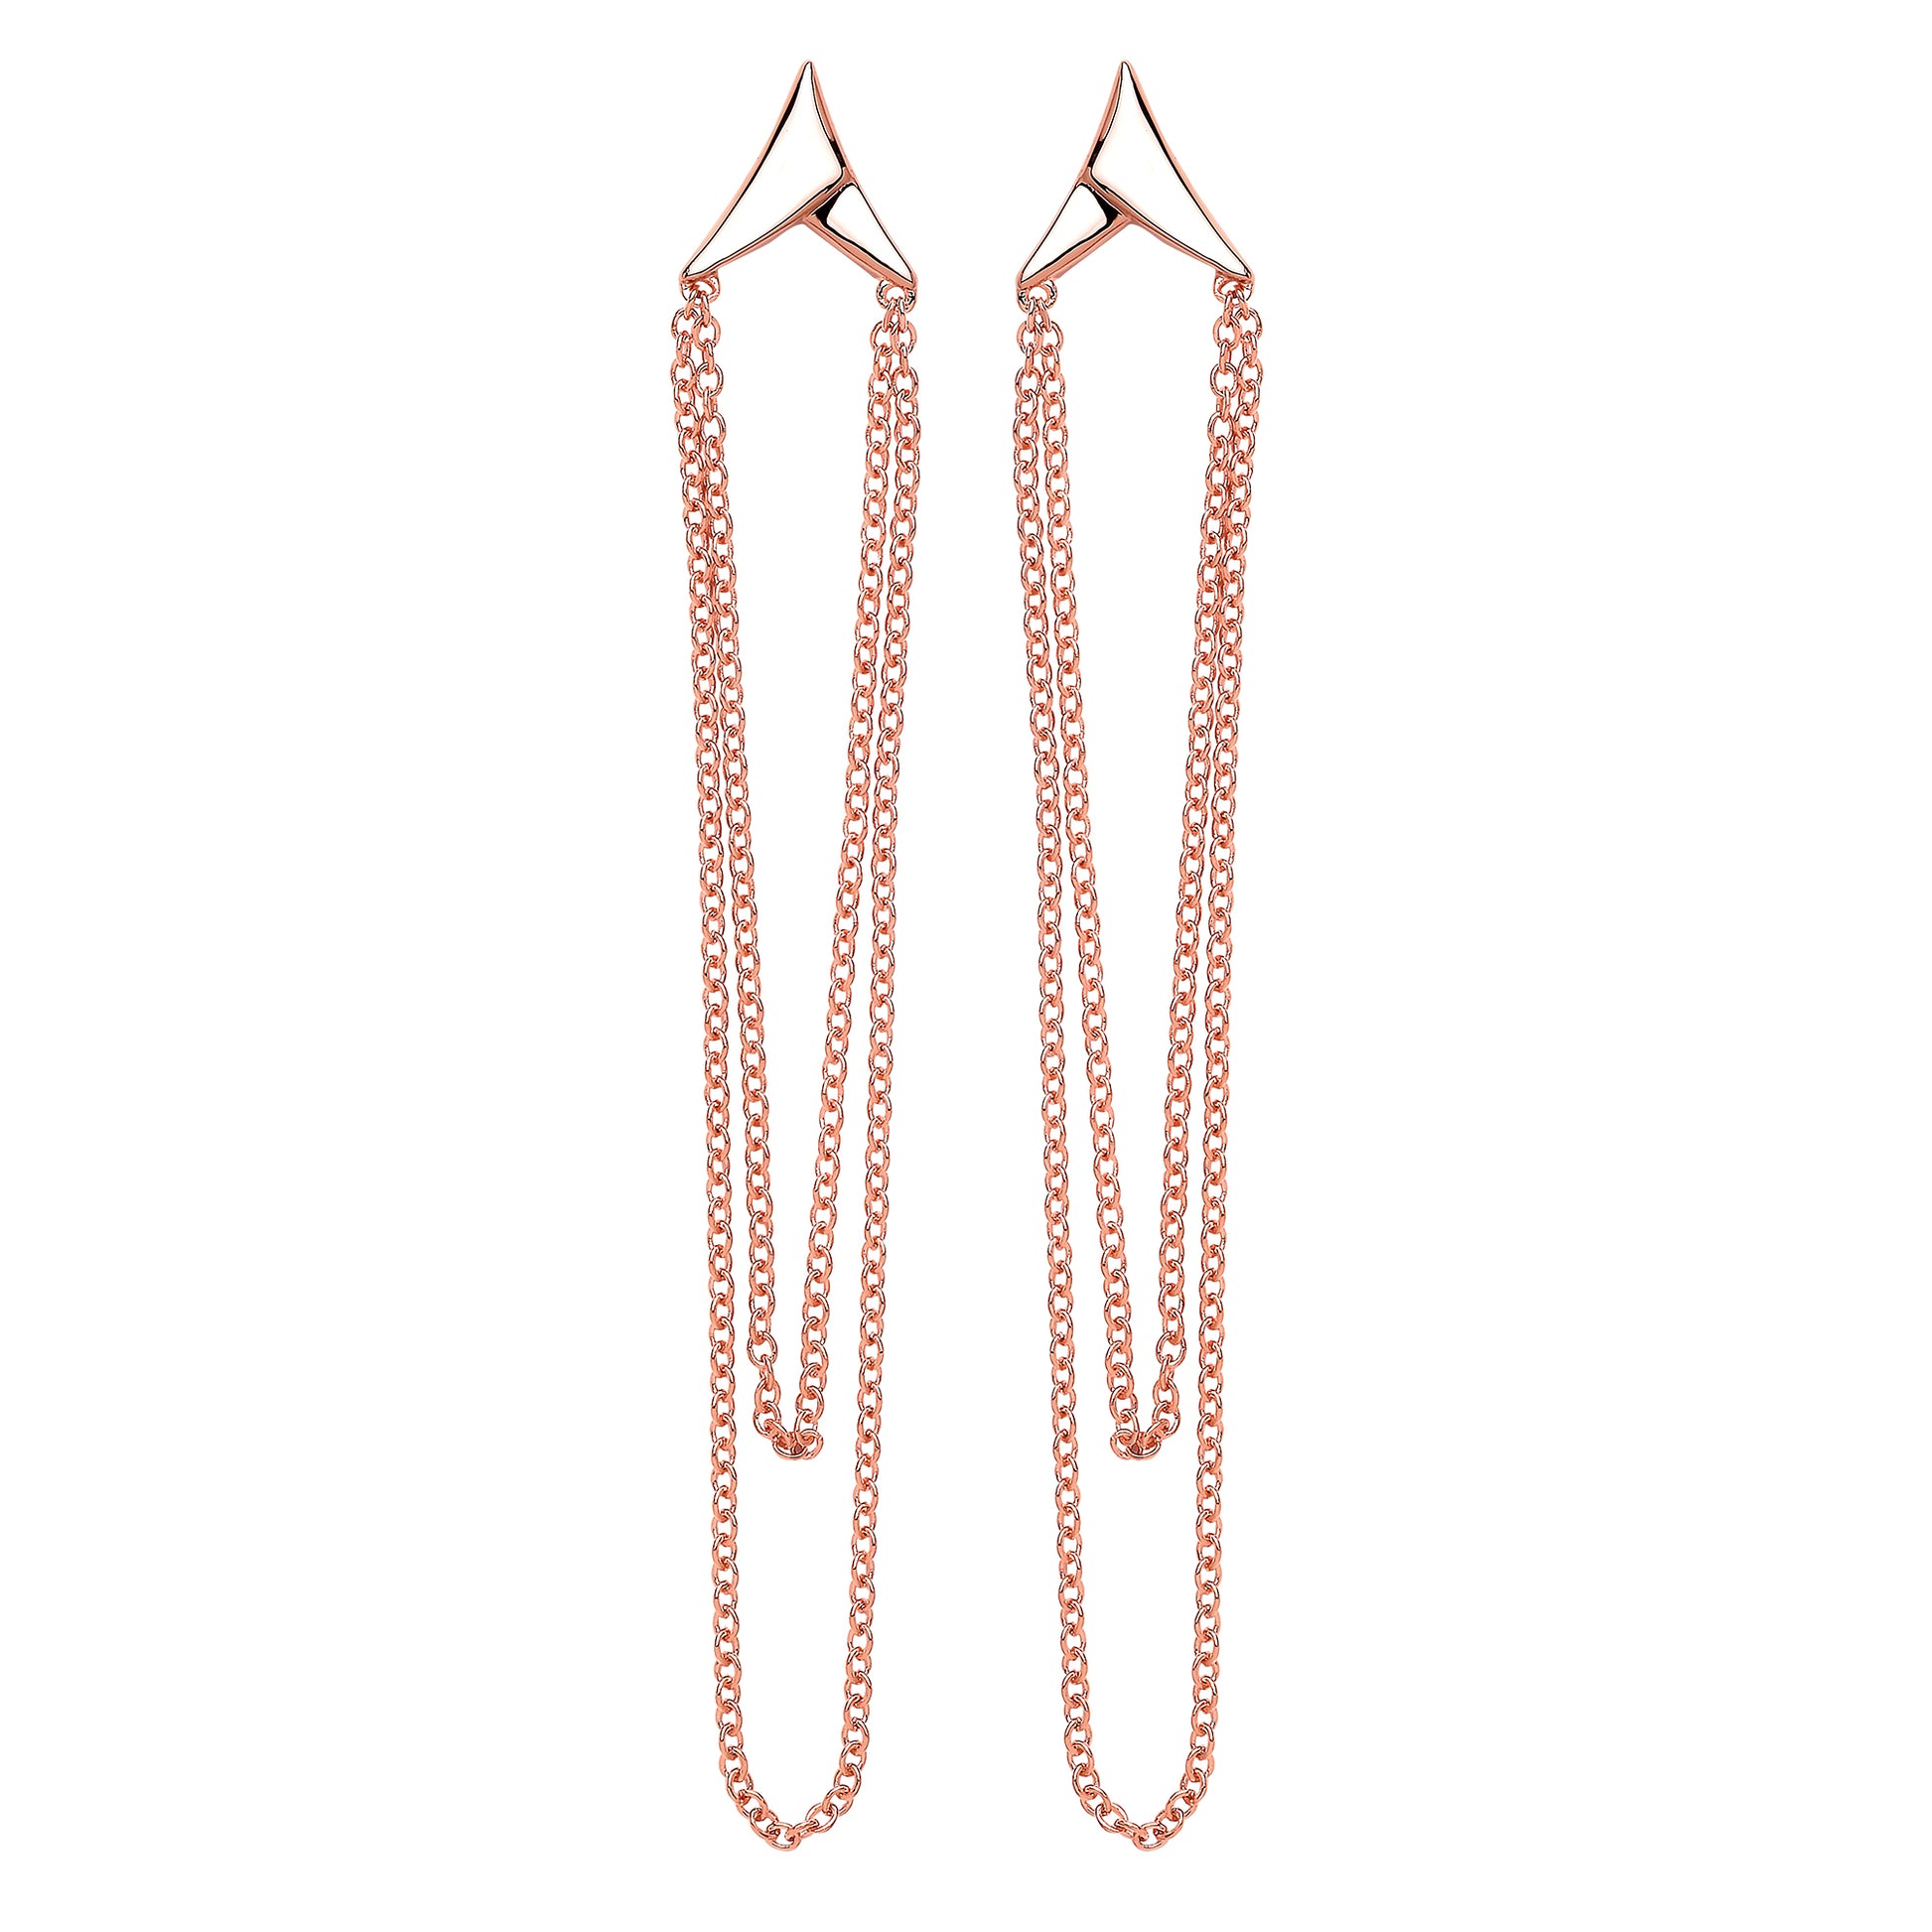 Rose Silver  Chain Necklace Drop Earrings - GVE558